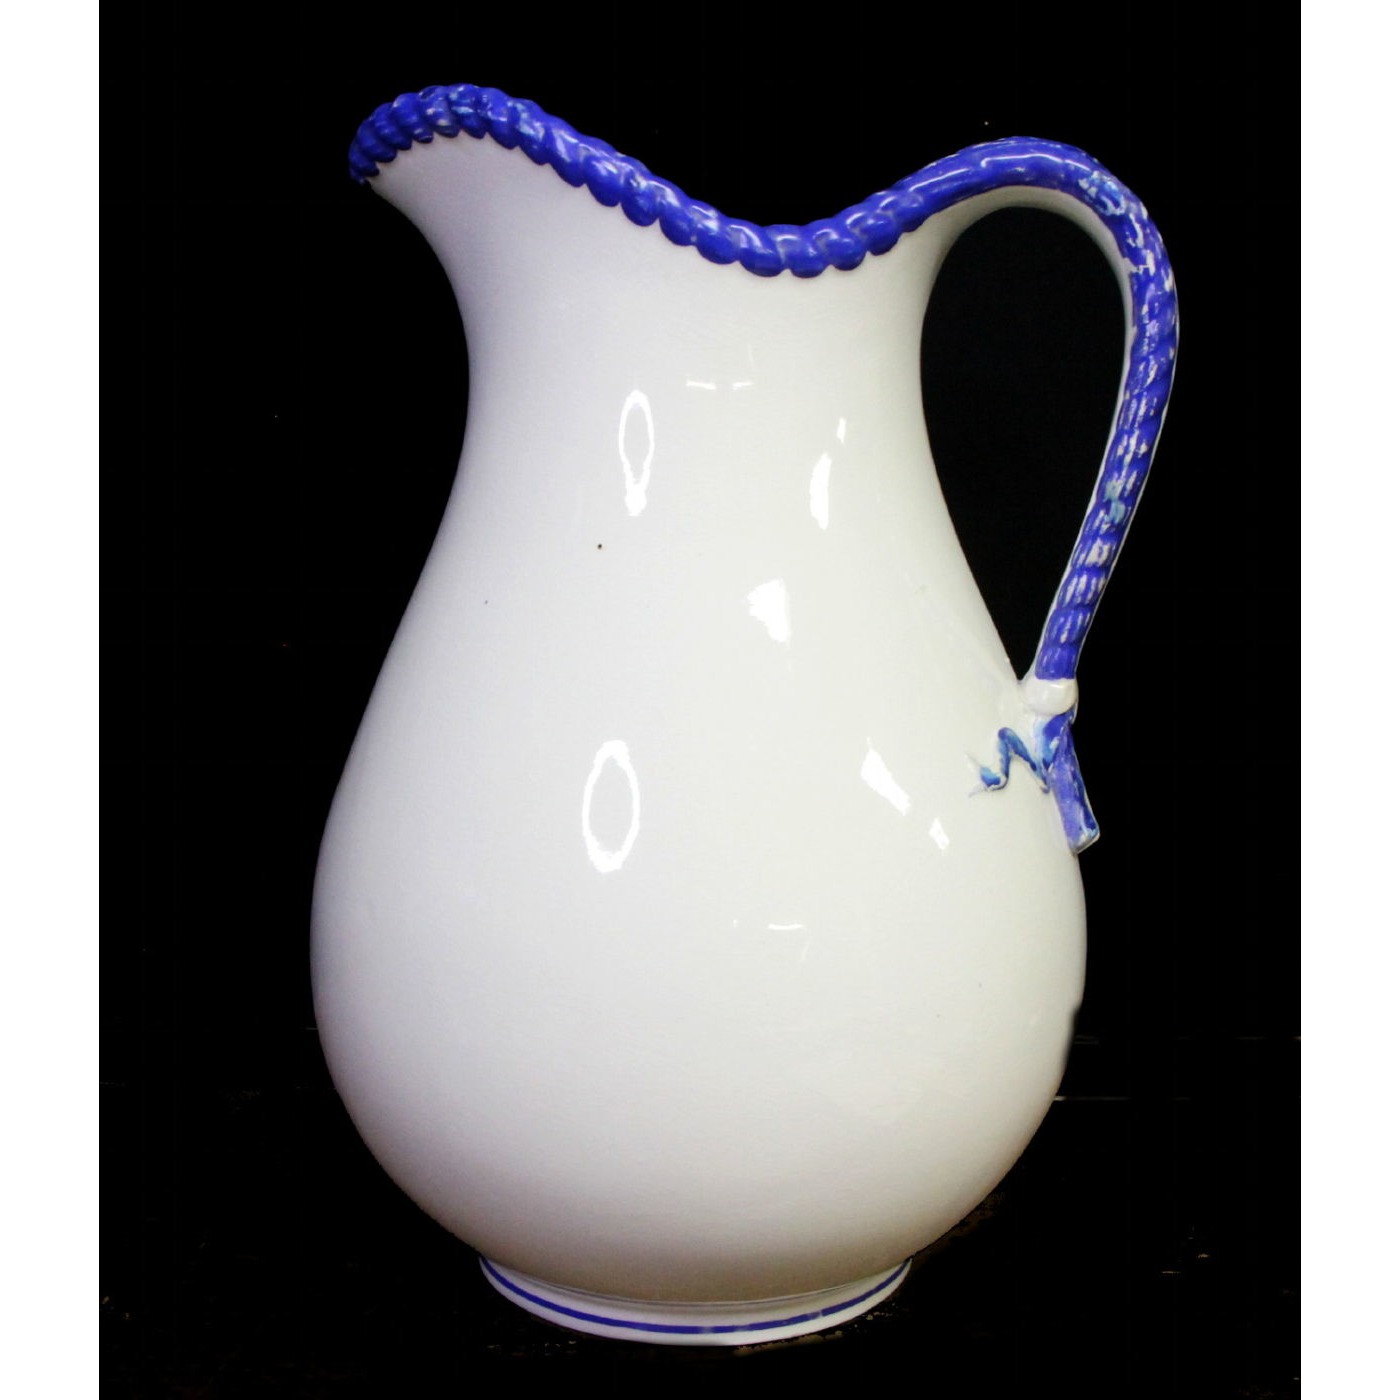 Fabulous Hand-Painted Rich Blue Trim Extra-Large Ironstone Pitcher Ewer